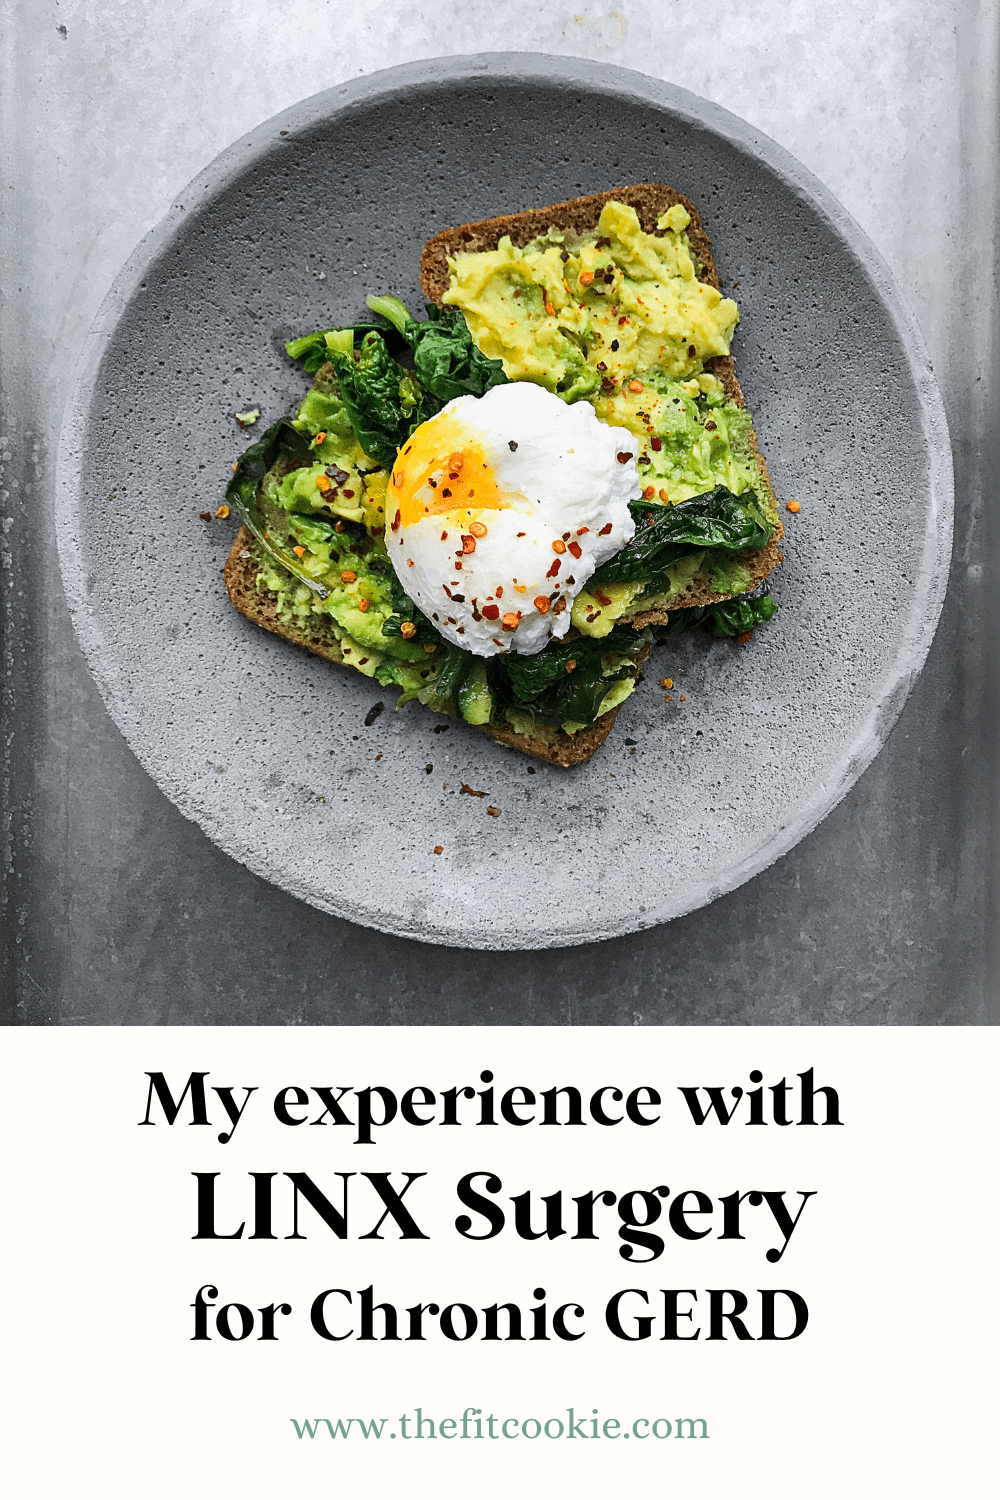 overhead photo of a plate of food with text overlay that says "my experience with LINX surgery for chronic GERD".